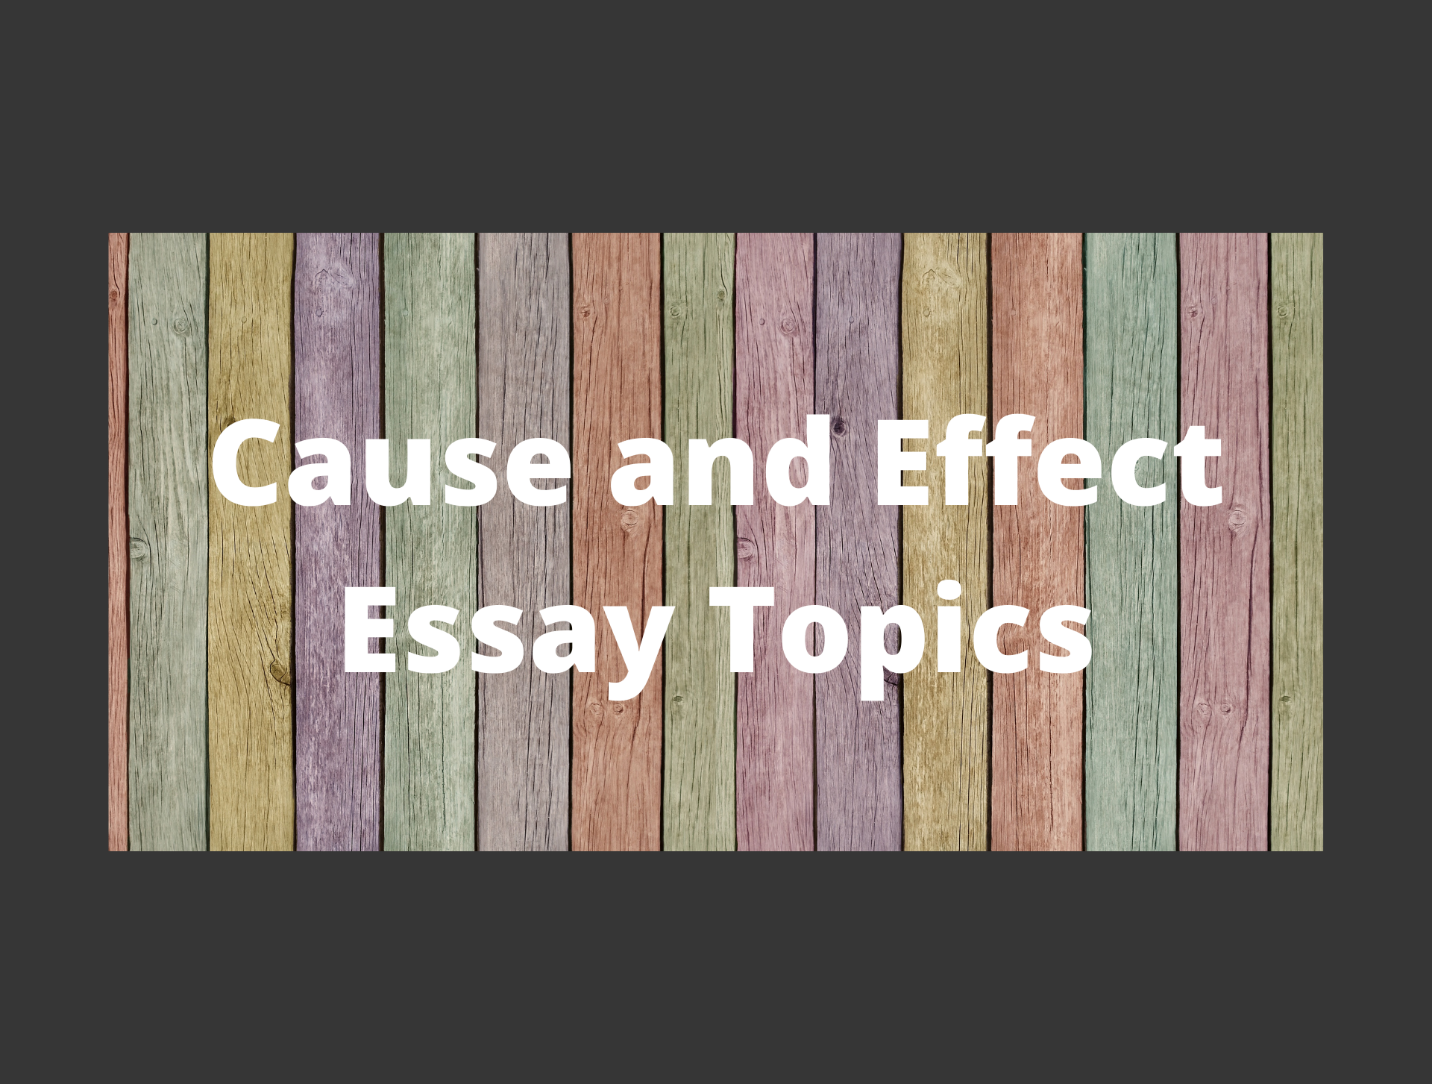 Cause and effect topics